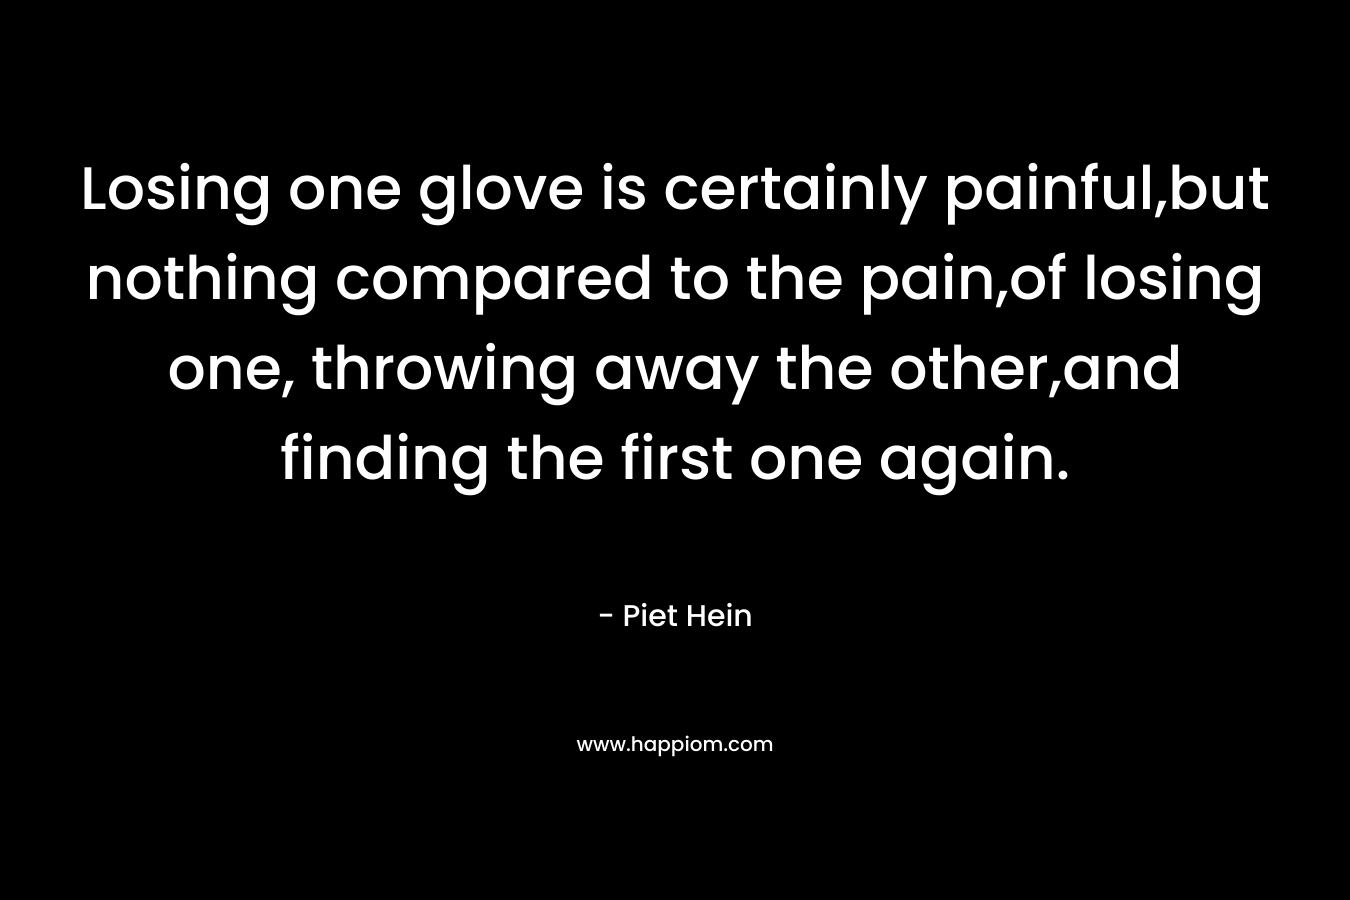 Losing one glove is certainly painful,but nothing compared to the pain,of losing one, throwing away the other,and finding the first one again. – Piet Hein